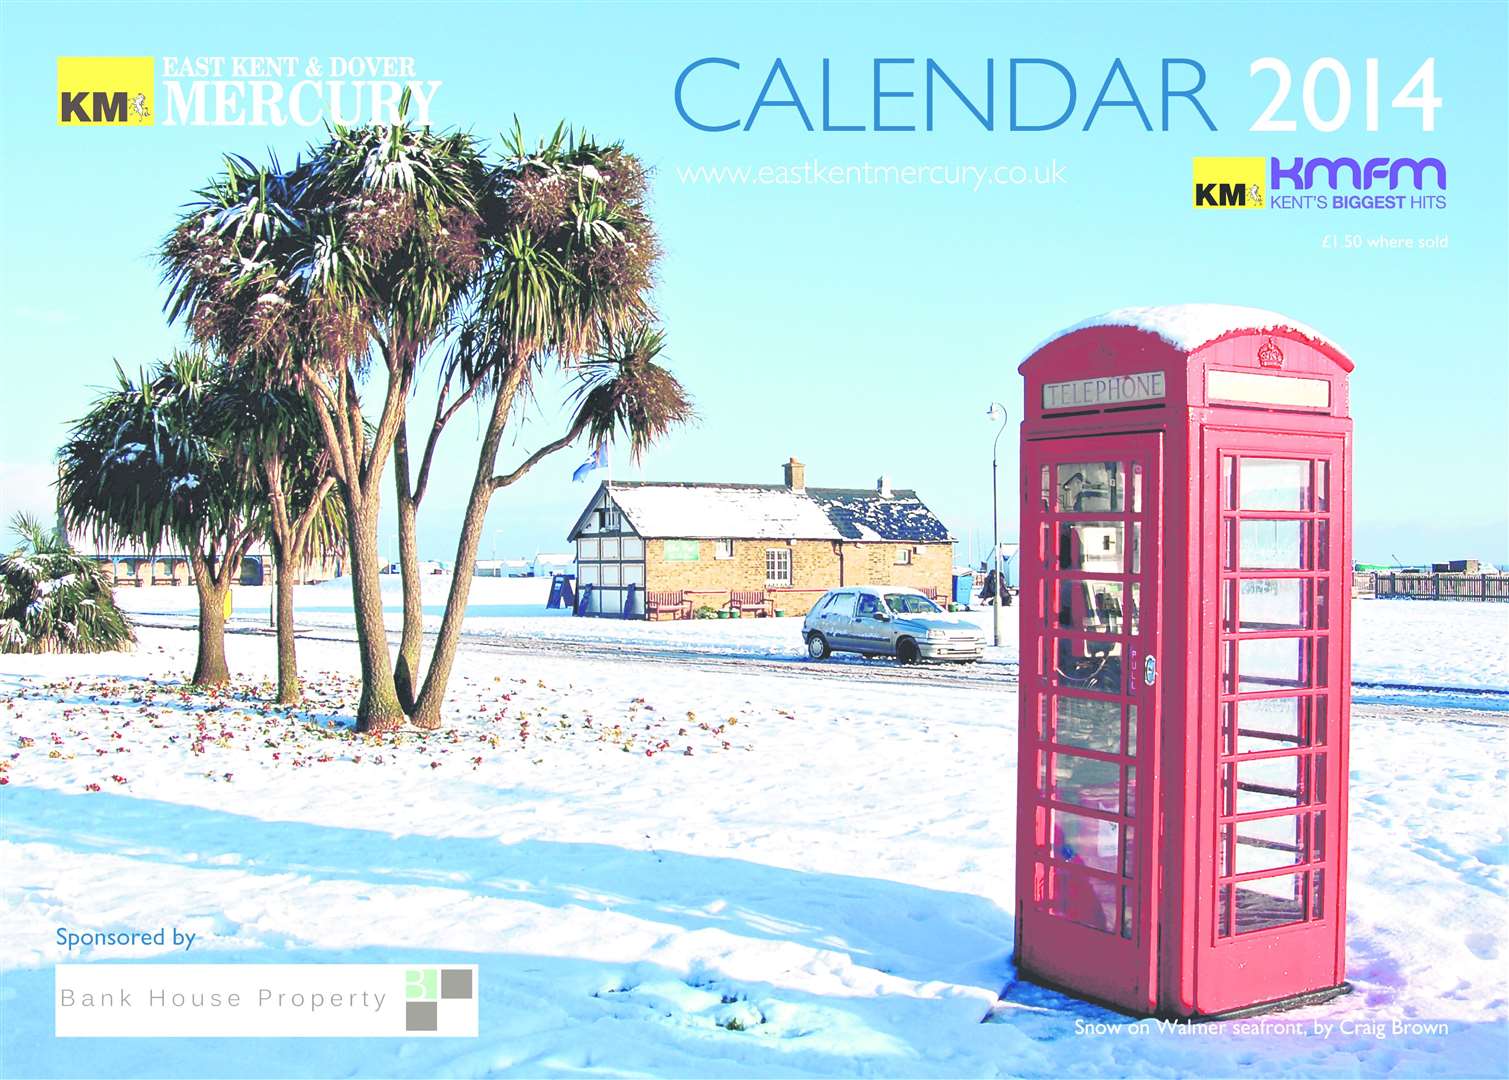 Craig Brown was the deserving winner of the photography competition in 2013 and his image of snow in Walmer went on the front page of the 2014 calendar.